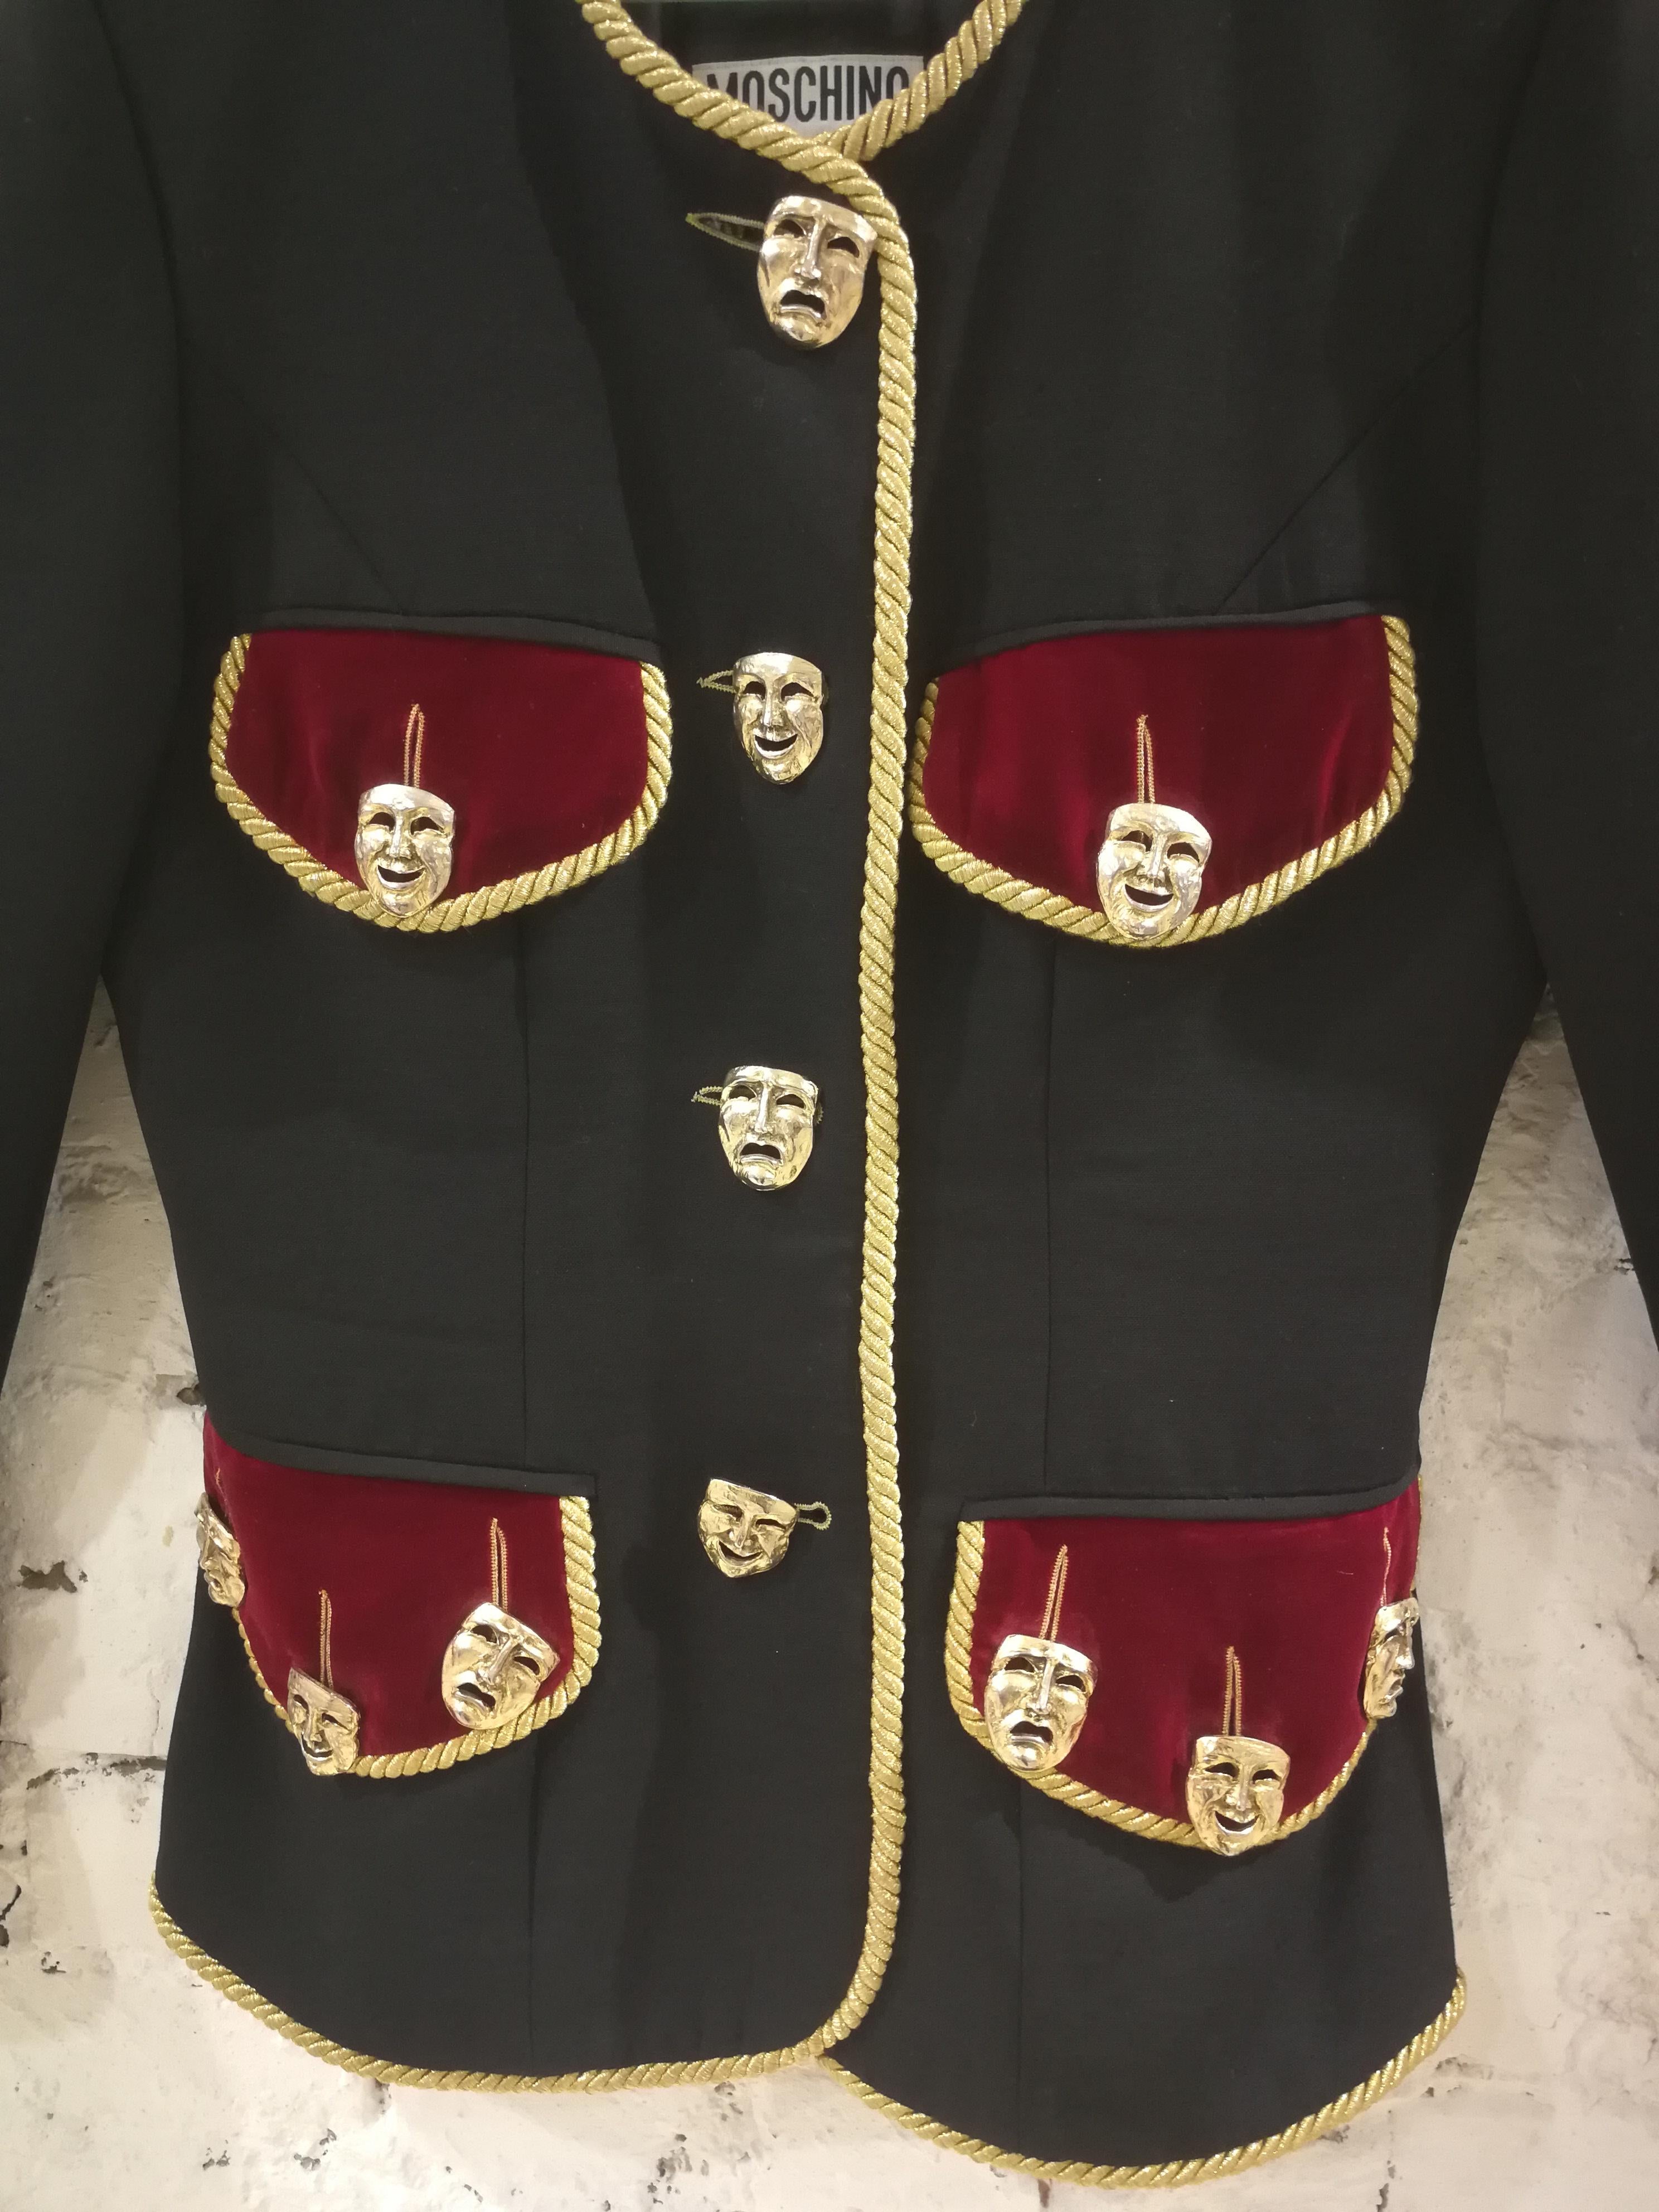 Moschino Couture Black Wool Masks Jacket
Black Moschino Couture vintage wool military jacket with gold-tone Comedy and Tragedy mask button accents throughout, burgundy velvet trim at cuffs and four front flap pockets, gold-tone braided trim